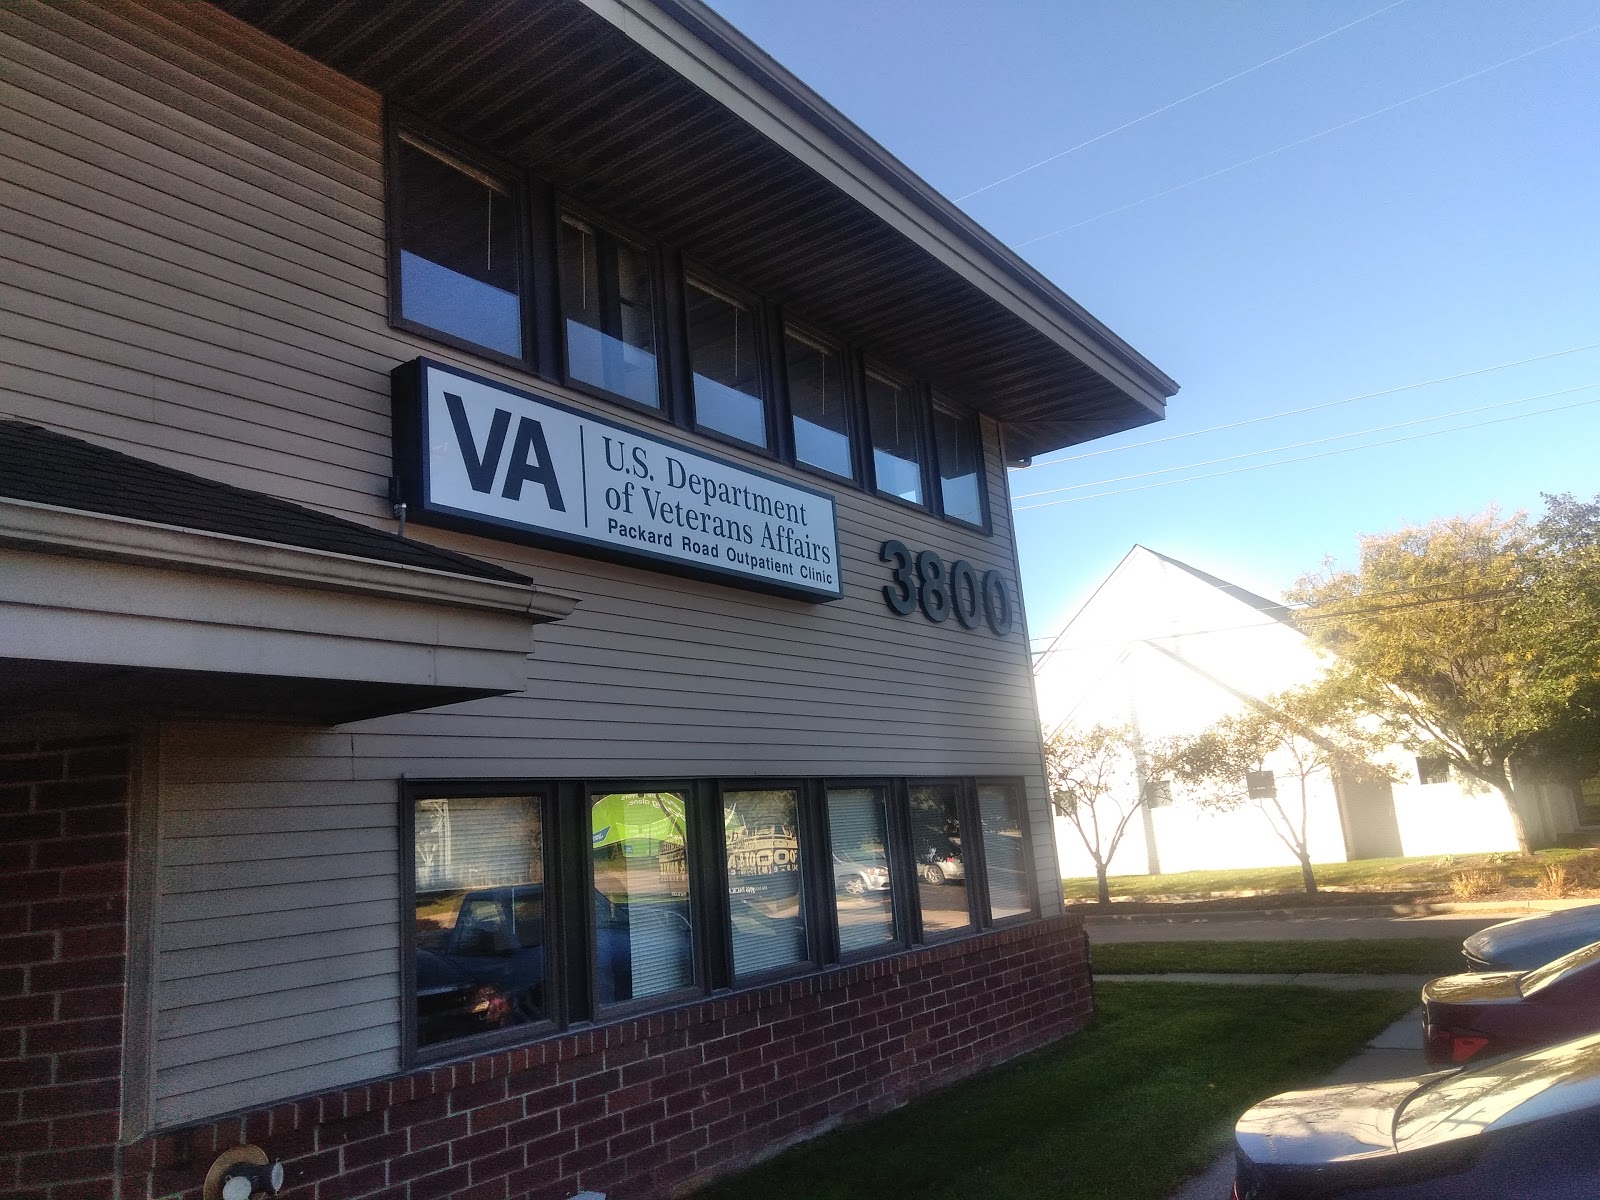 VA Ann Arbor Healthcare System - Packard Road Community Outpatient Clinic